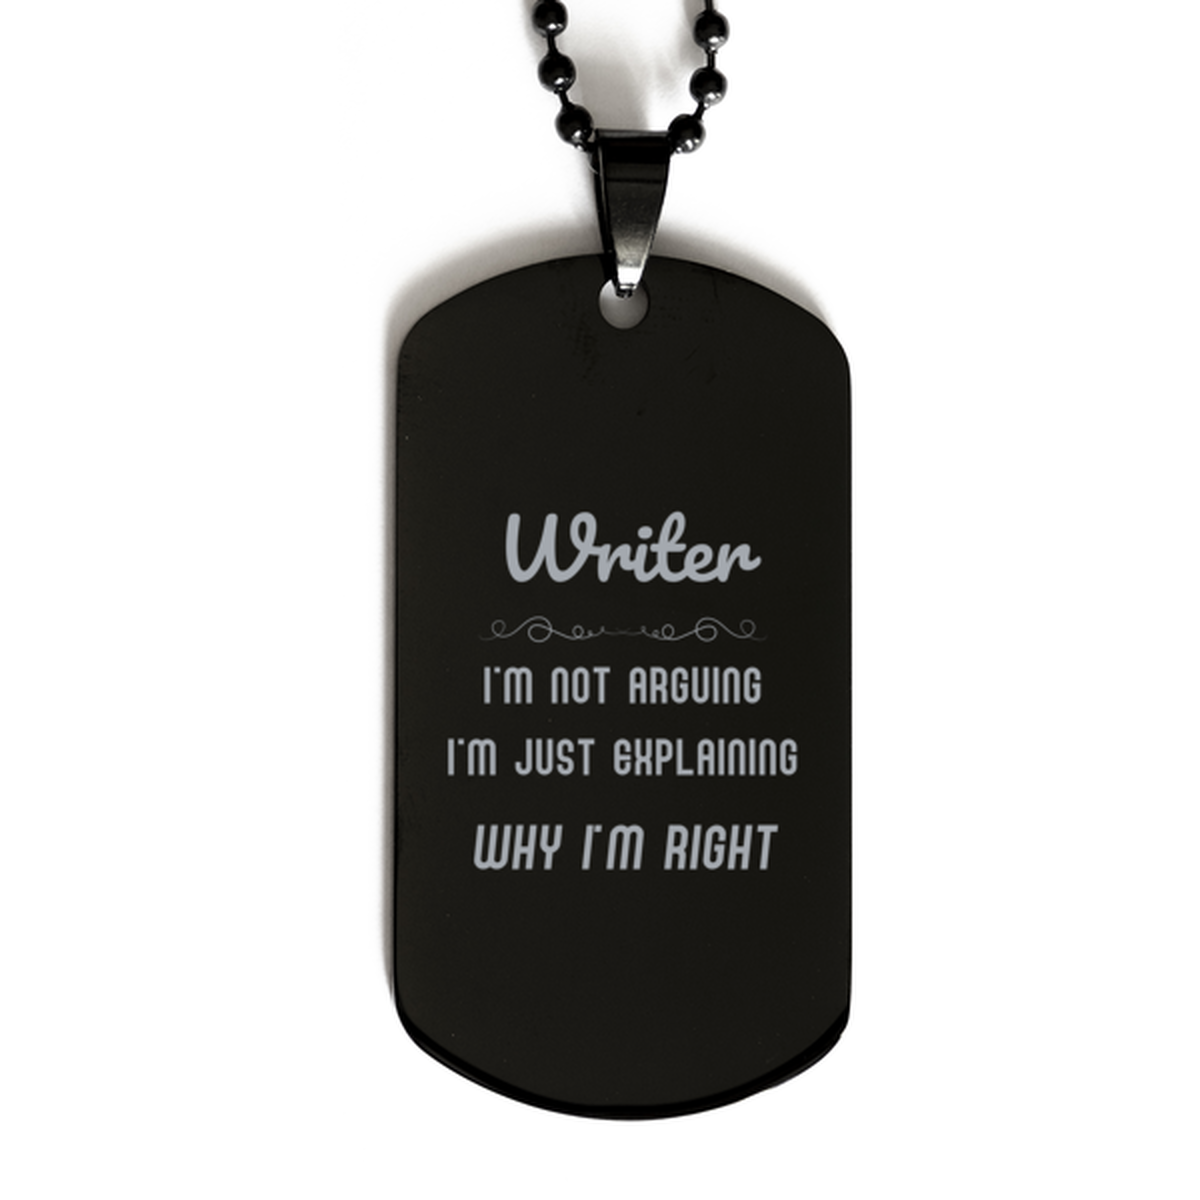 Writer I'm not Arguing. I'm Just Explaining Why I'm RIGHT Black Dog Tag, Funny Saying Quote Writer Gifts For Writer Graduation Birthday Christmas Gifts for Men Women Coworker